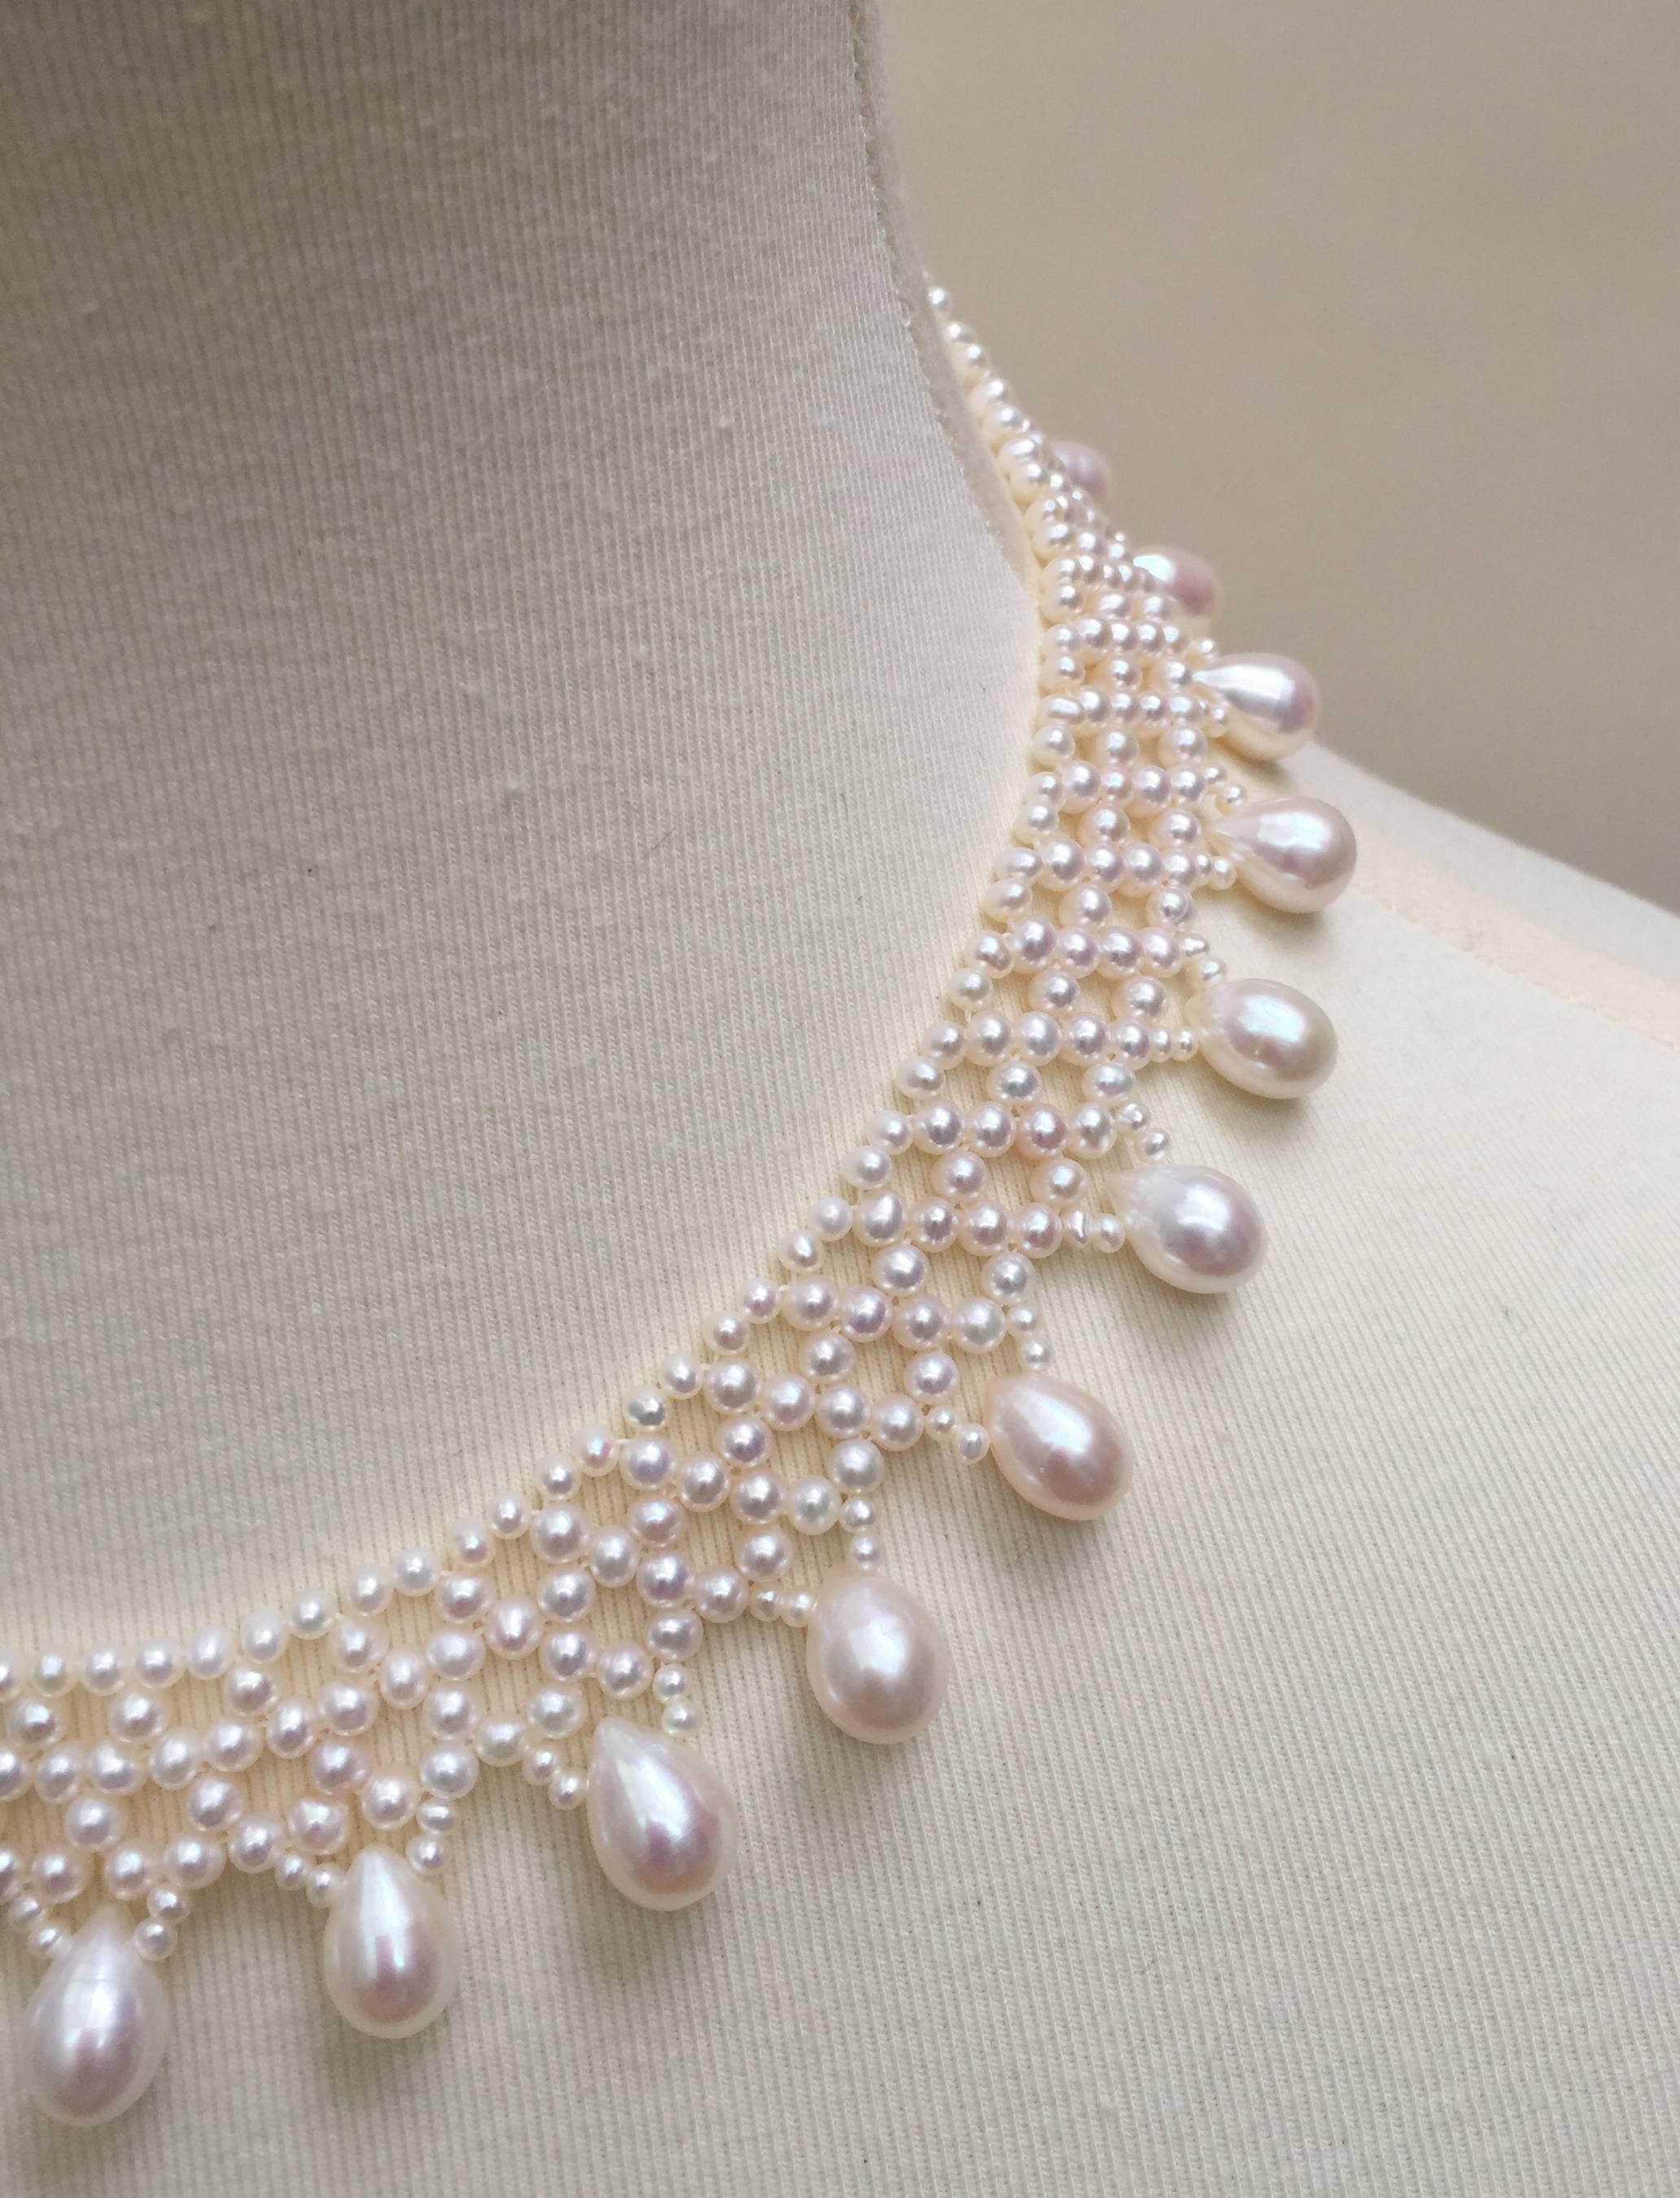 Artist   Marina J  Woven Pearl Necklace with Pear-Shaped Pearl Drops and sliding clasp